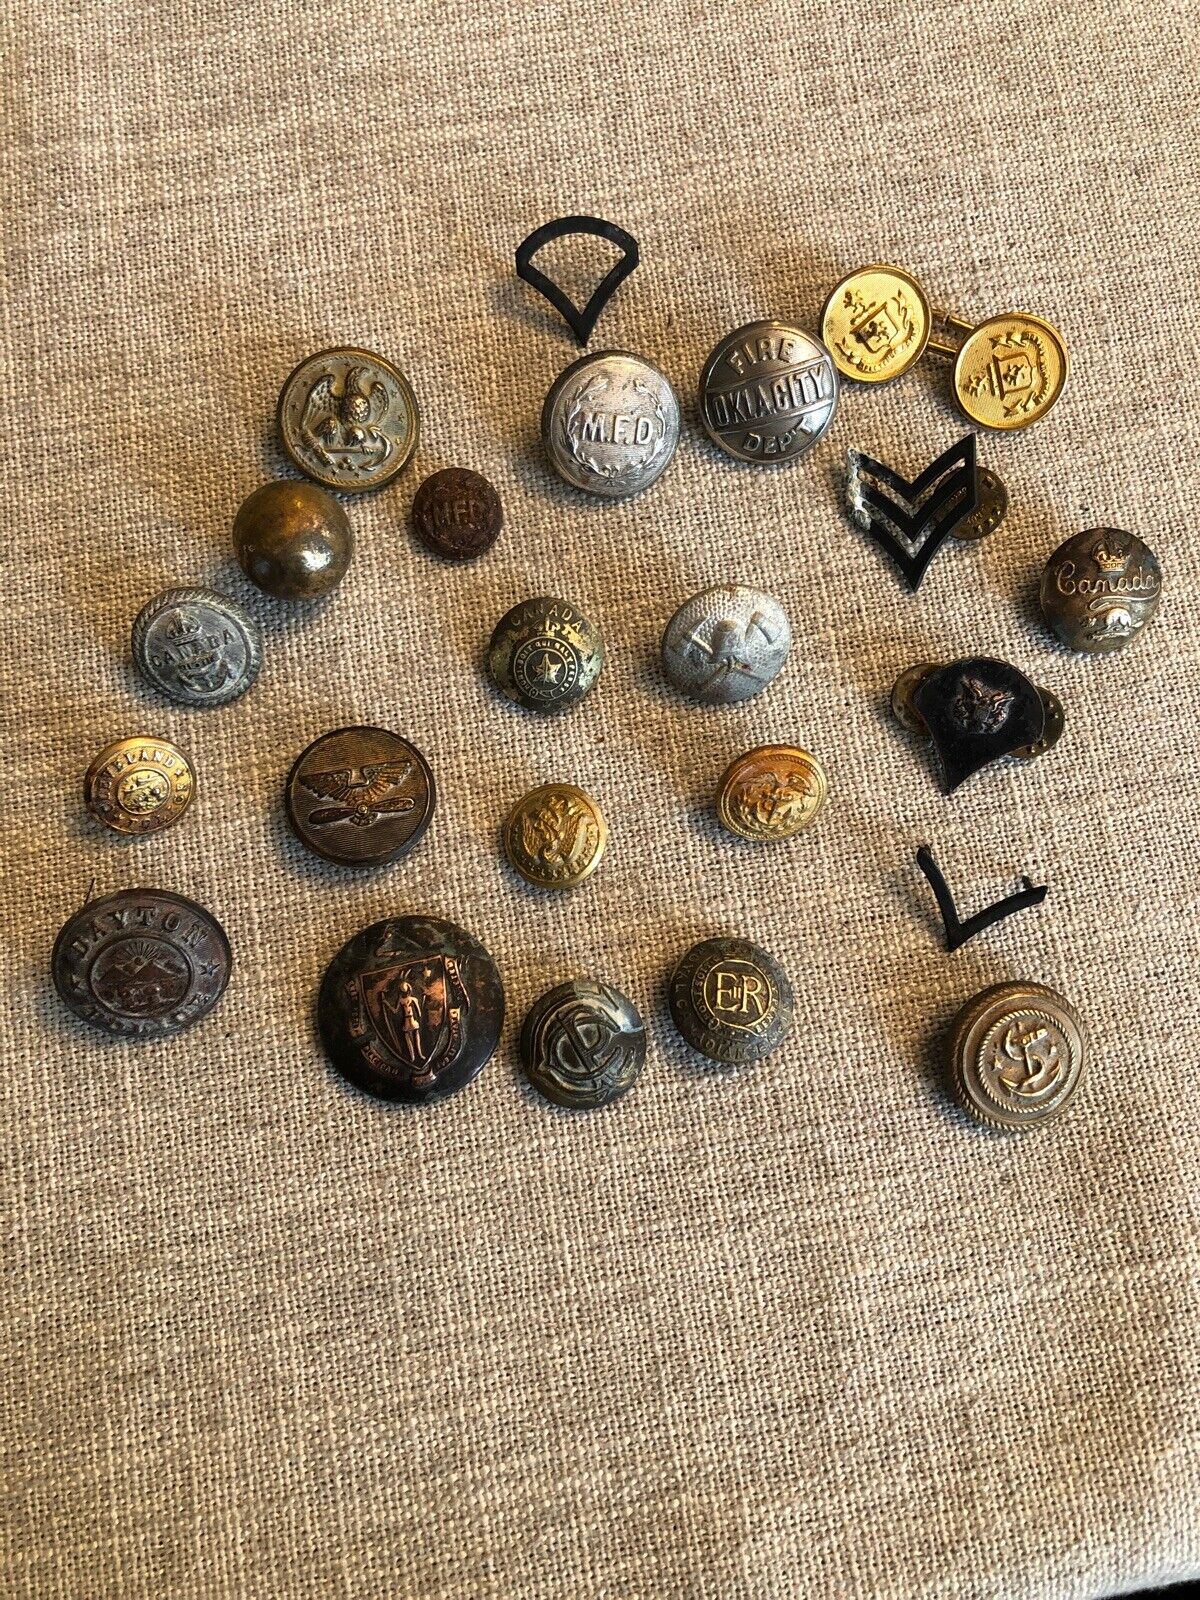 Lot 24 Antique Canada British Fire Military Police Metal Jacket Buttons Uniform